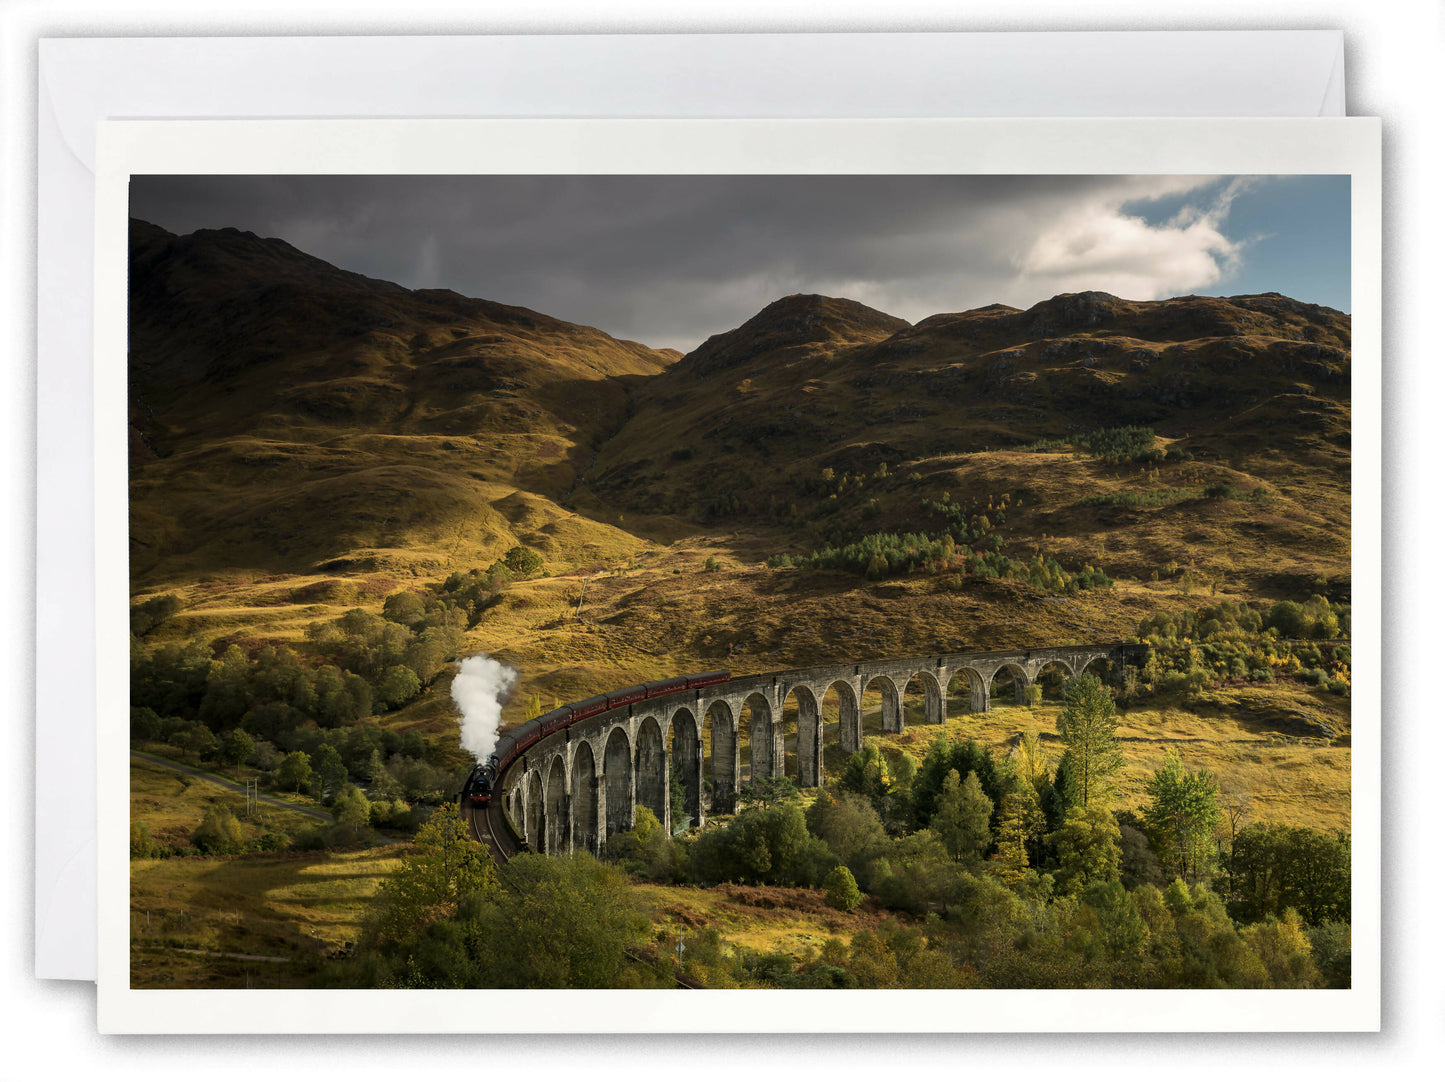 The Jacobite steam train over Glenfinnan Viaduct - Scotland Greeting Card - Blank Inside